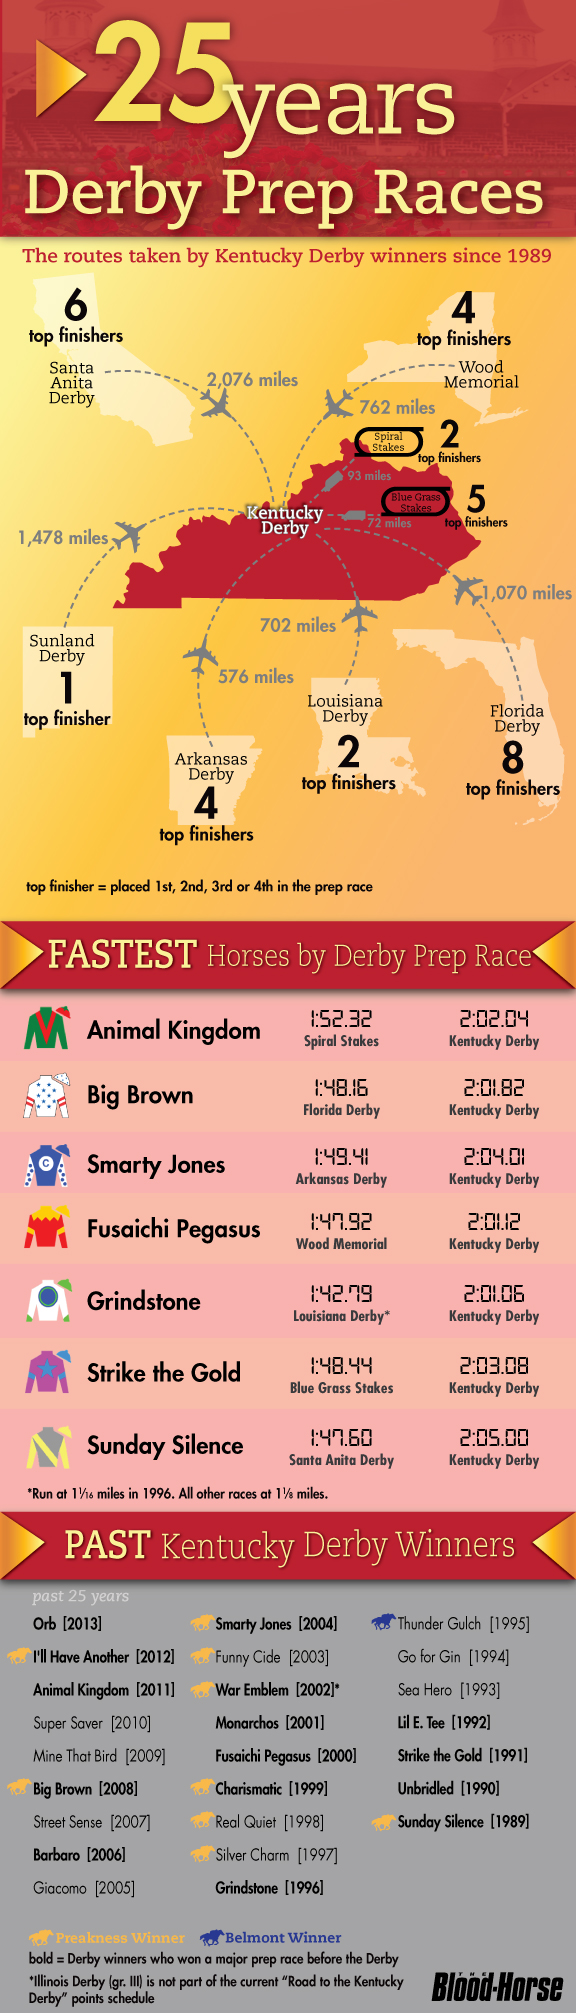 25 Years of Kentucky Derby Prep Races Visual.ly